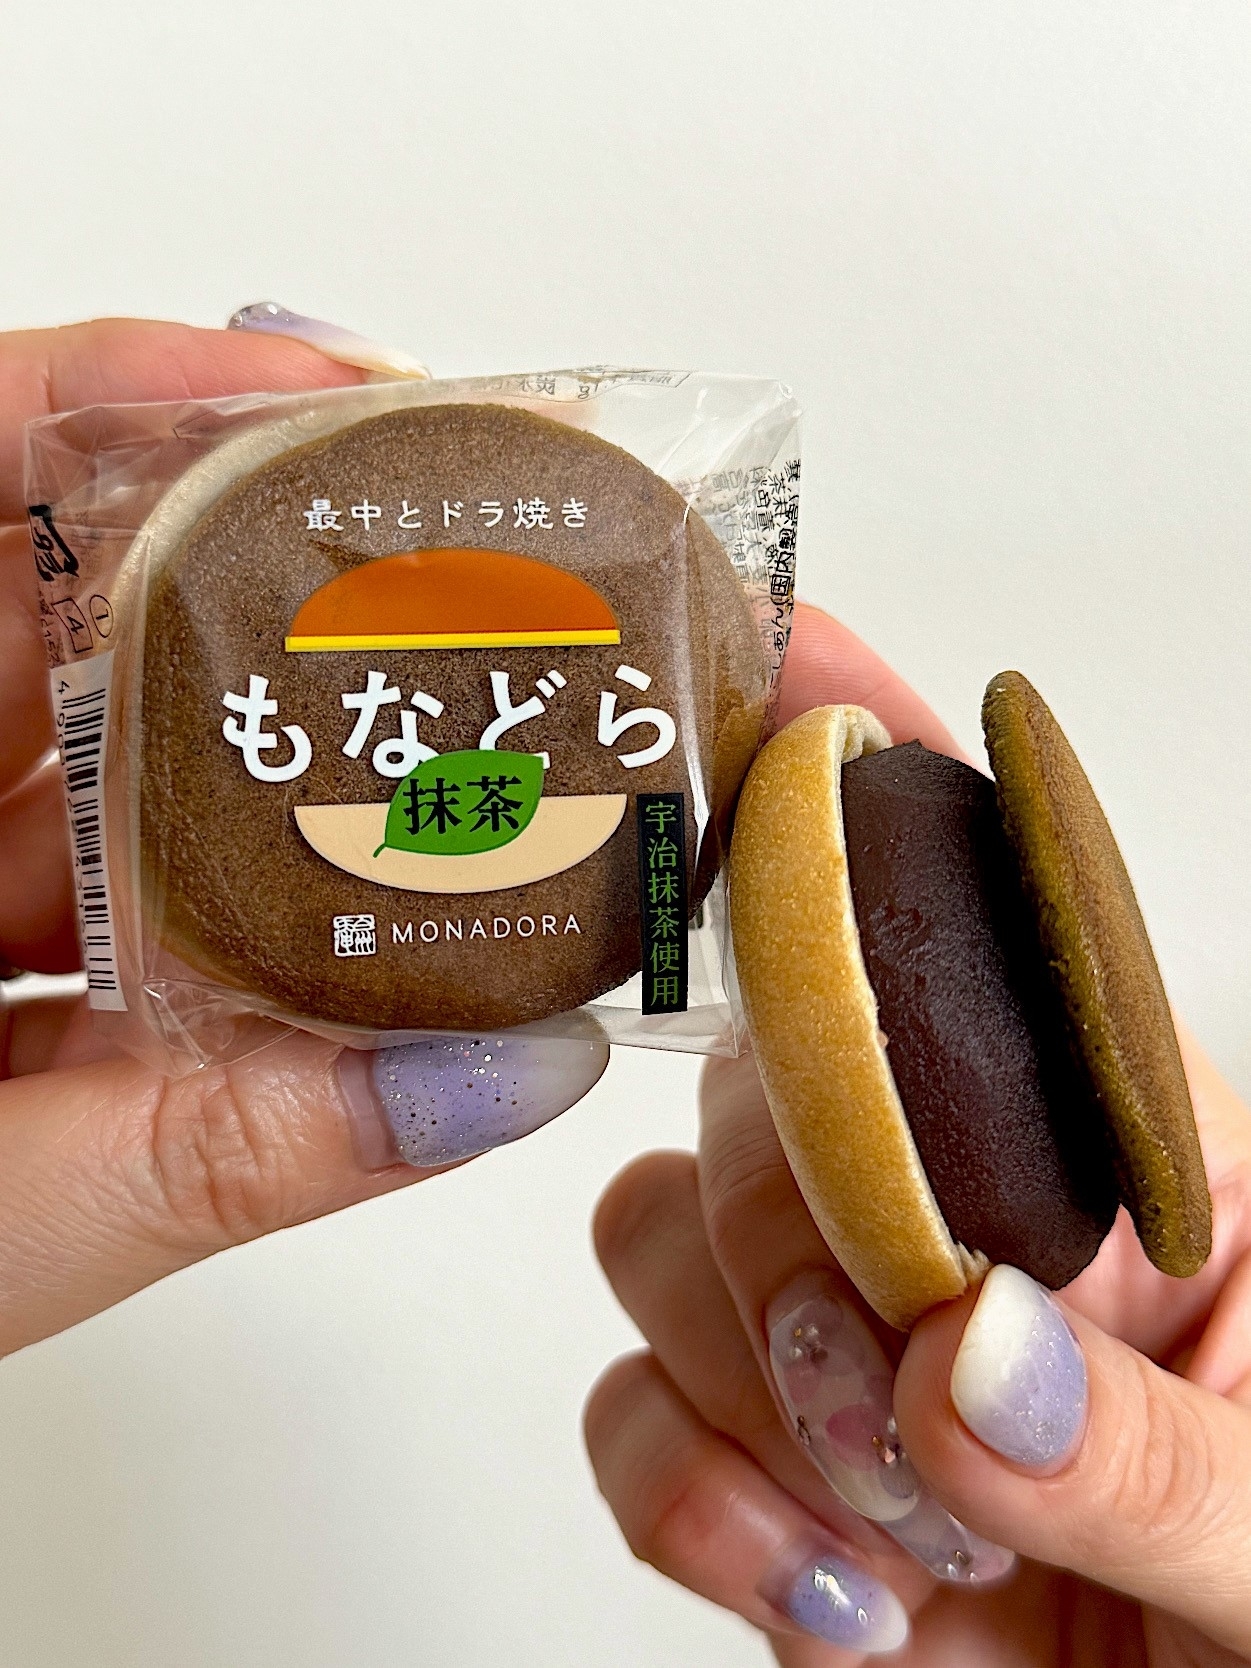 A person holding a packaged Japanese monaka wafer and one split open to show red bean filling